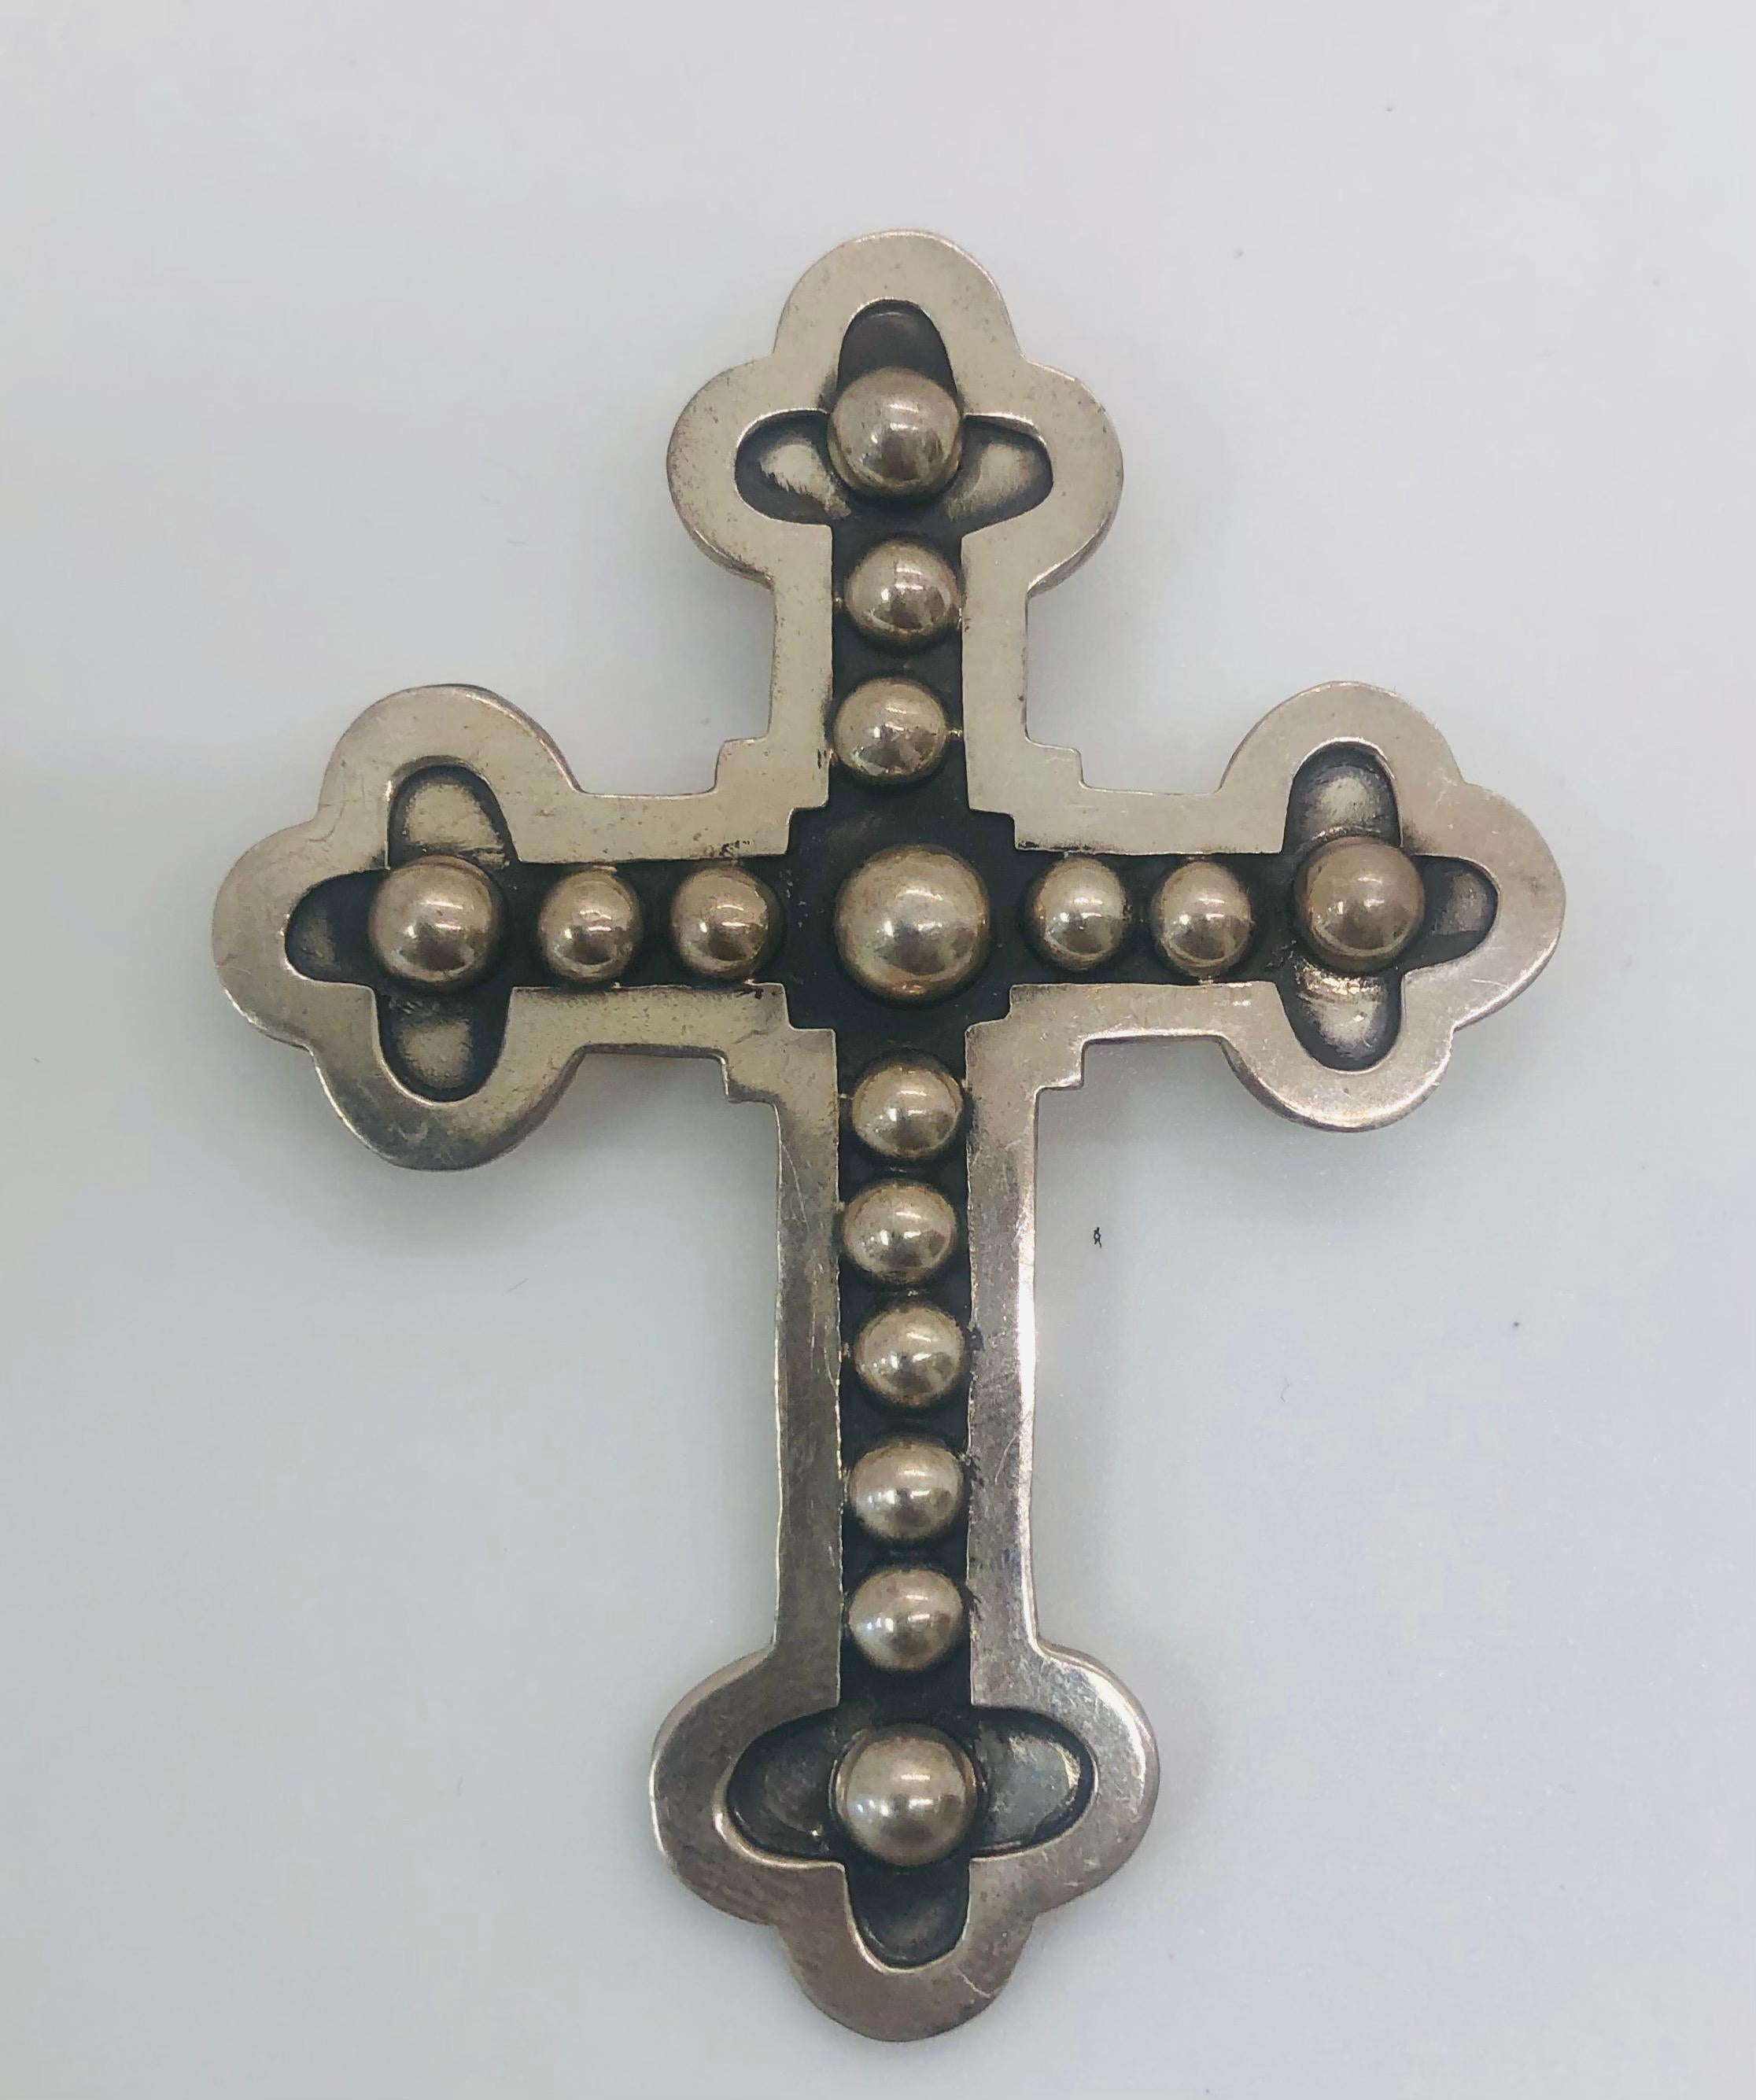 A set of 6 hand crafted antique cross pendant. Each pendant is different in style and shows Native American design in the style of pendant is made of sterling silver. The pieces are attributed to T-Foree but not signed by the designer. 

6 piece